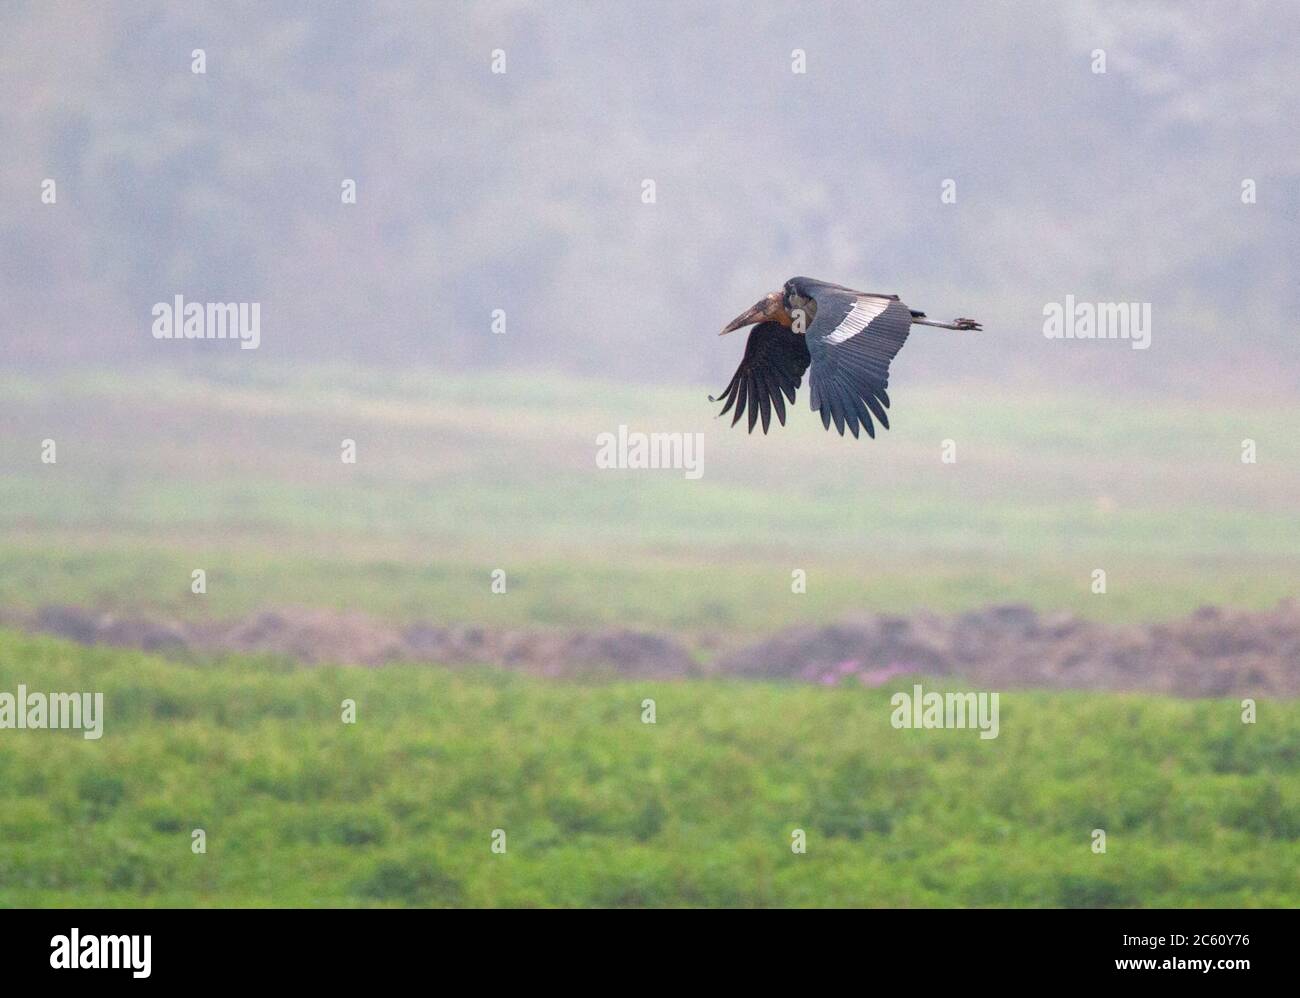 Greater Adjutant (Leptoptilos dubius) in Asia. Flying low over rural agricultural field. Stock Photo